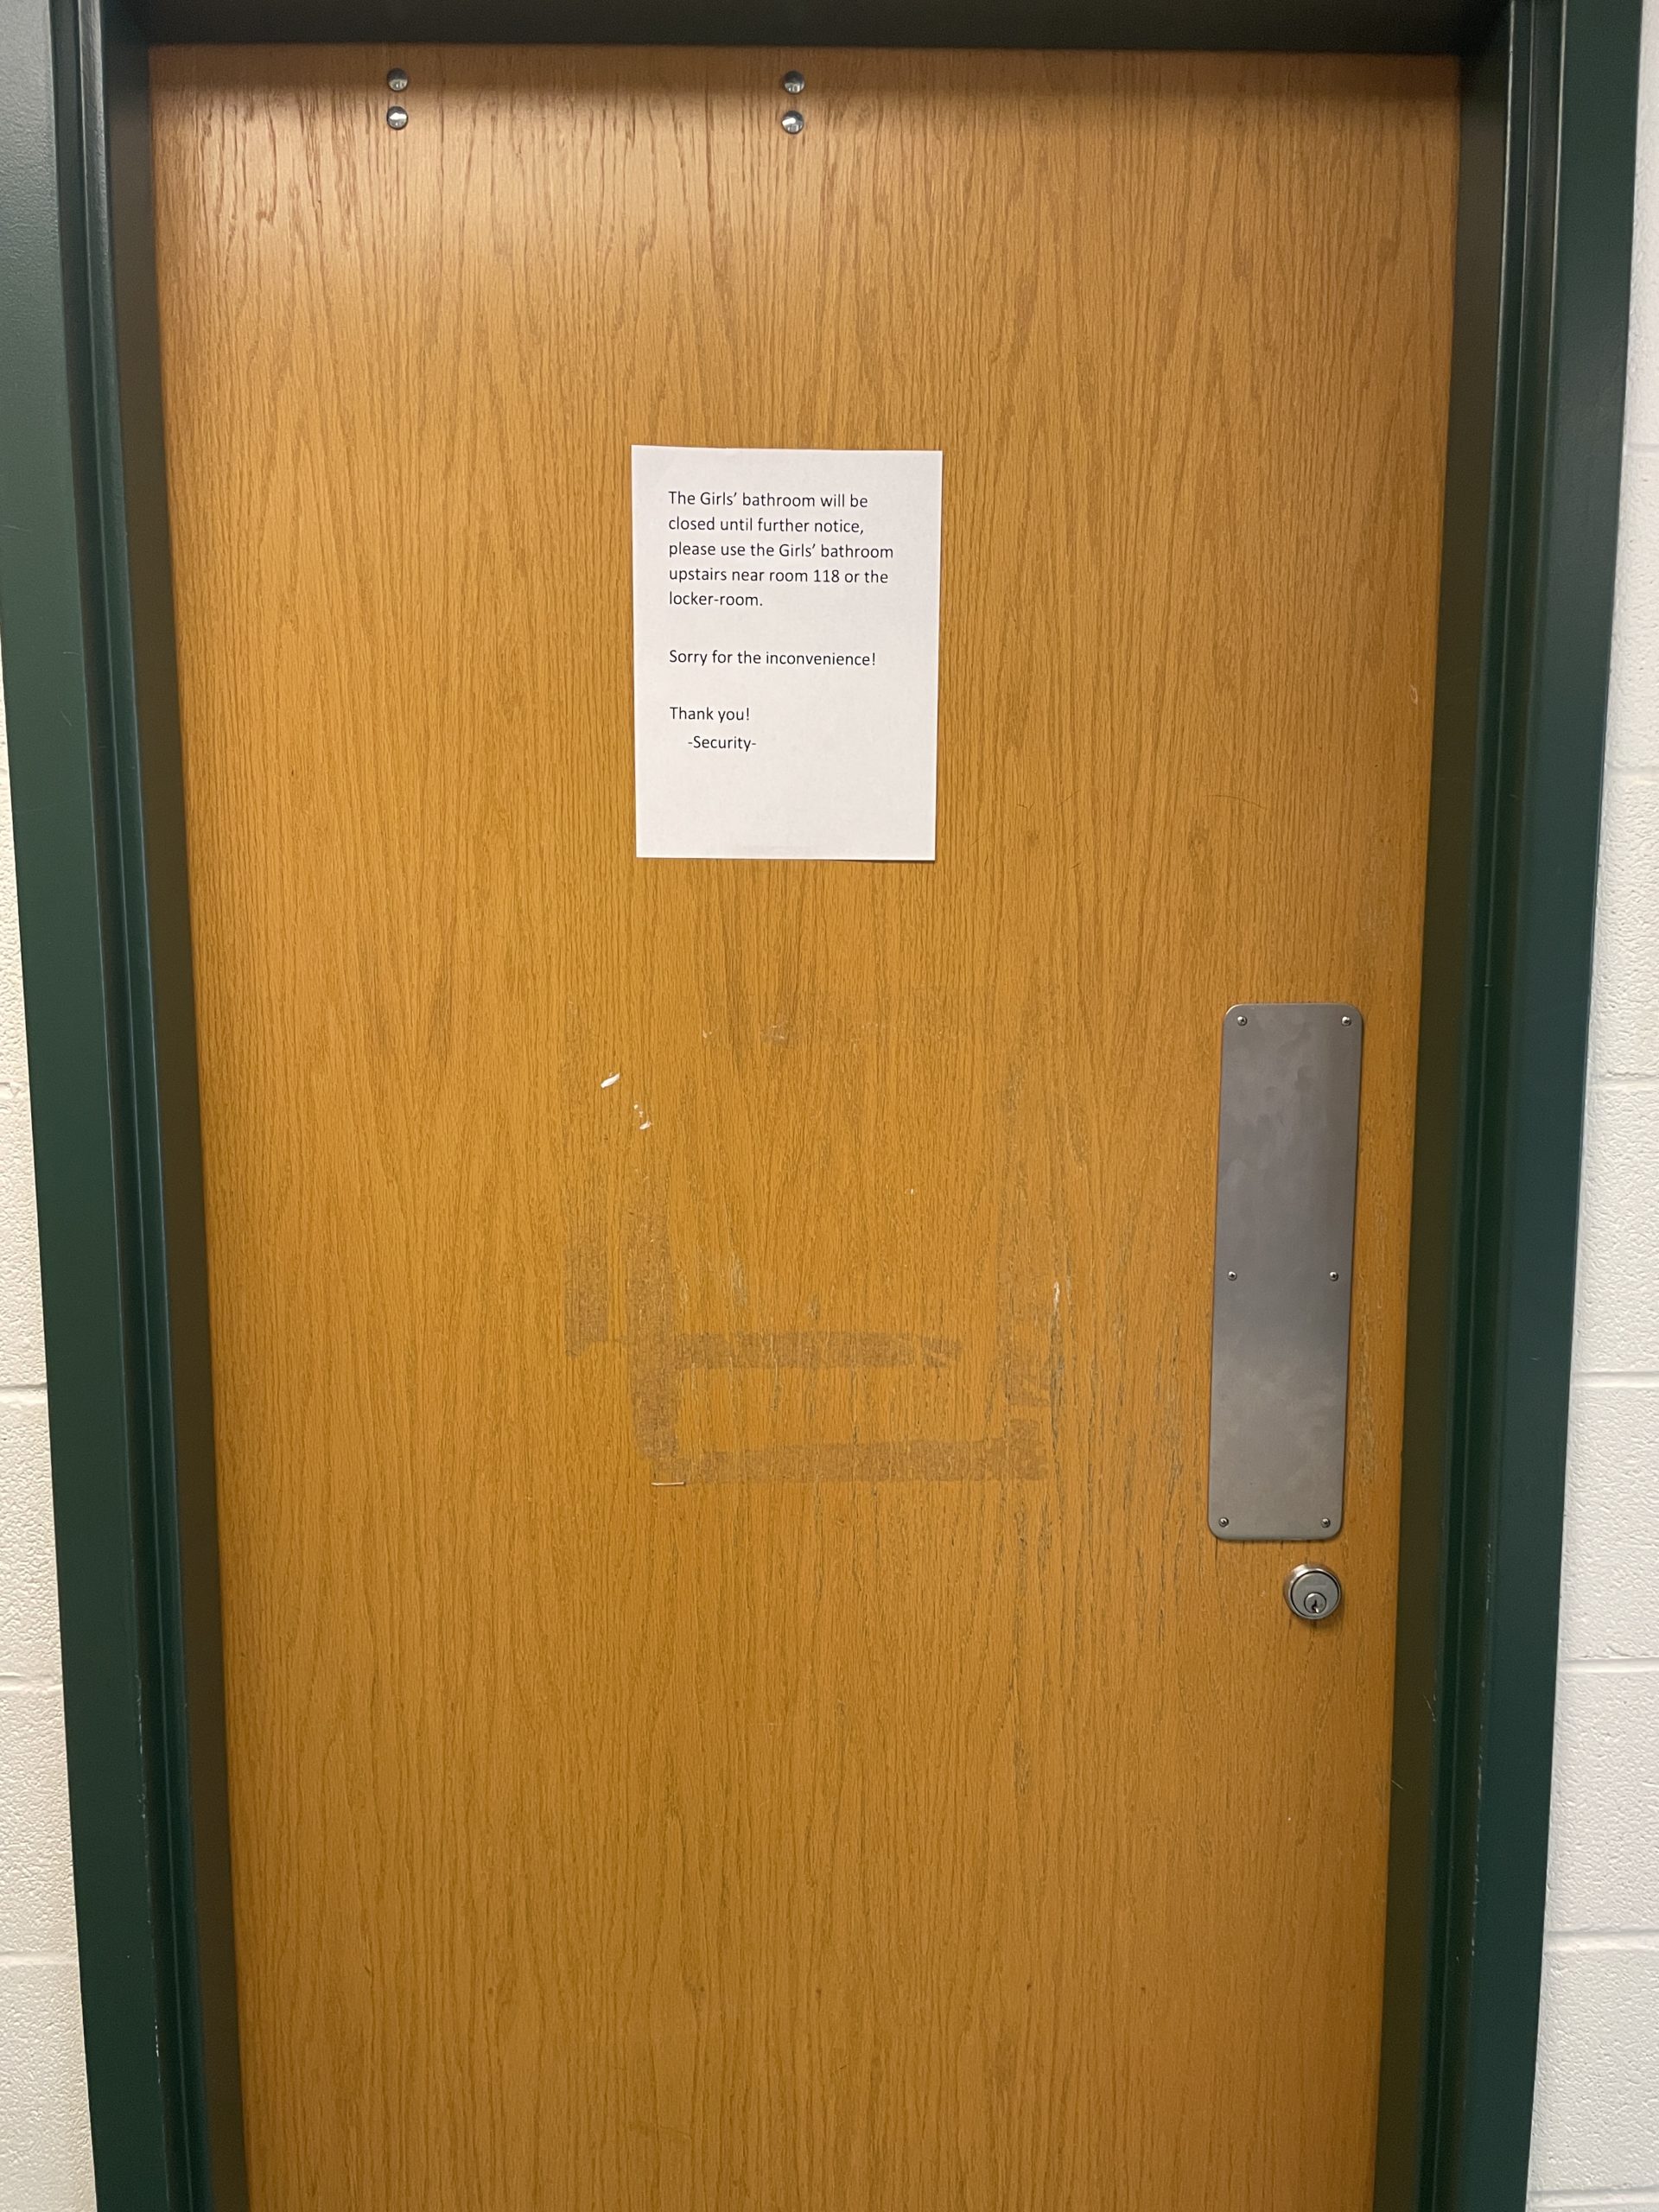 The bathroom on the G floor next to the portables is locked. Whenever a bathroom is locked there is a sign informing students where the next nearest unlocked bathroom is.